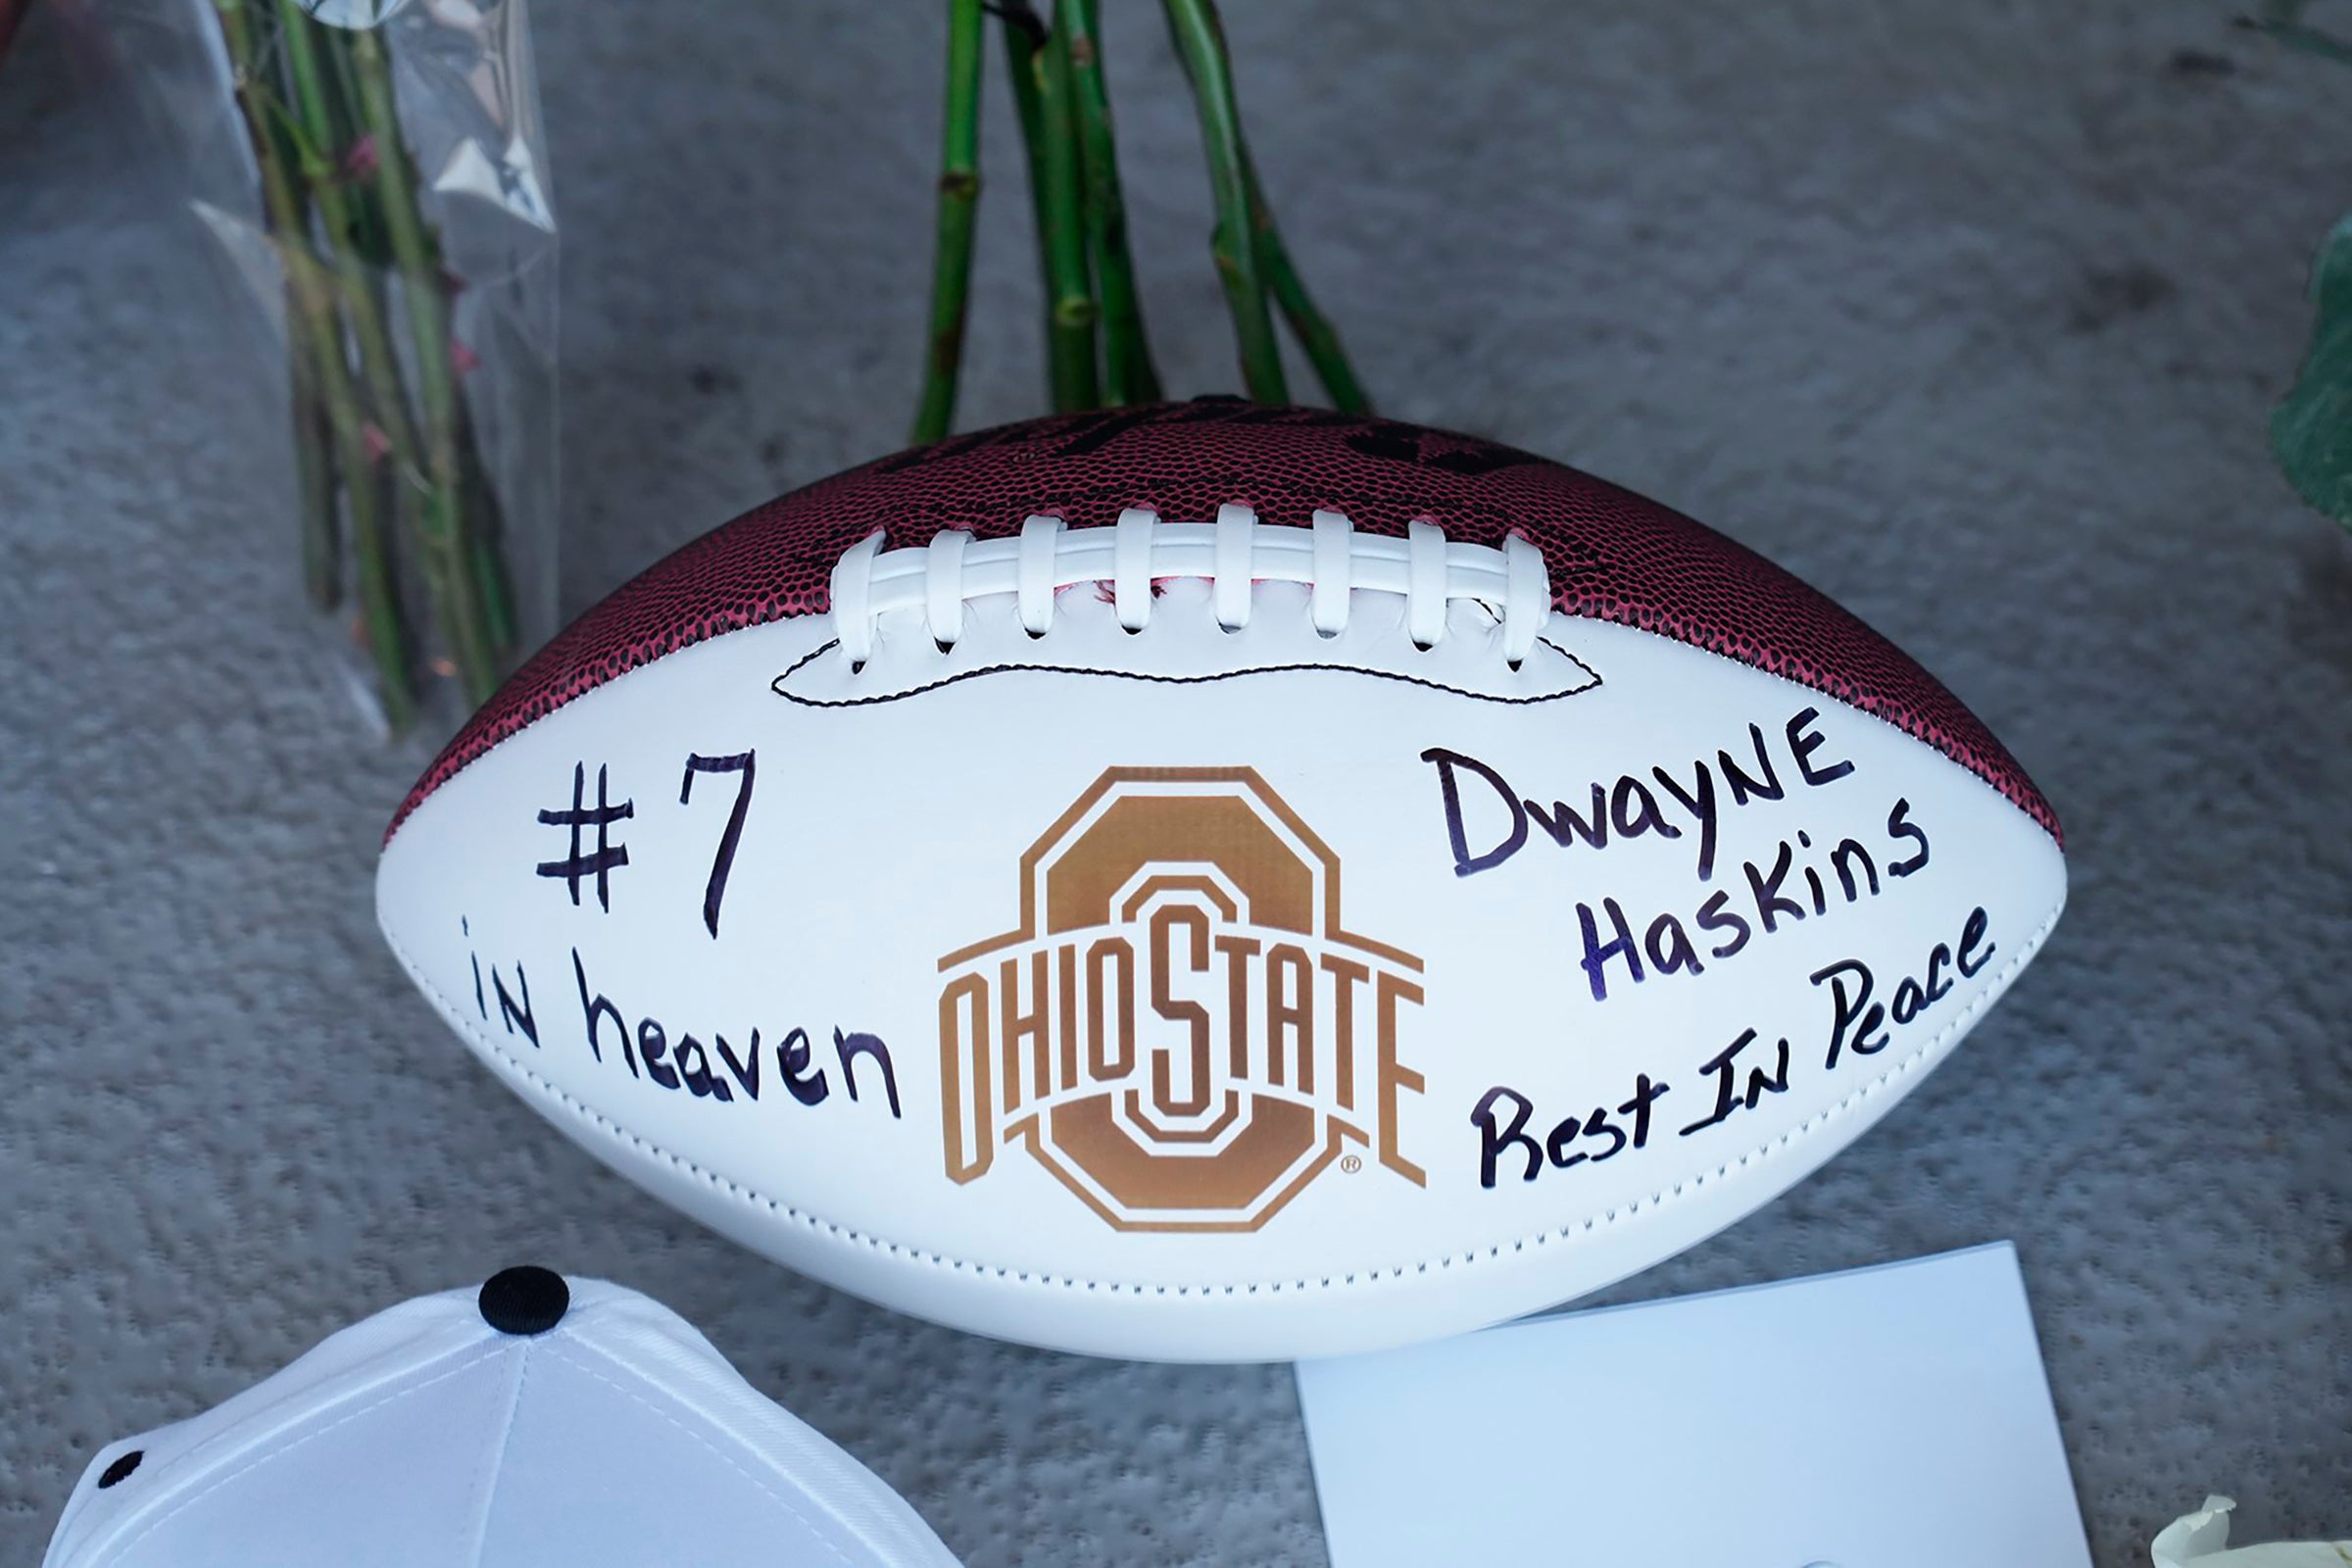 Mary Ellen Curzon-Price of Columbus left this football, roses, and other items at a makeshift memorial for former Ohio State football player and Pittsburgh Steelers quarterback Dwayne Haskins, at a memorial at Ohio Stadium on the campus of Ohio State University.